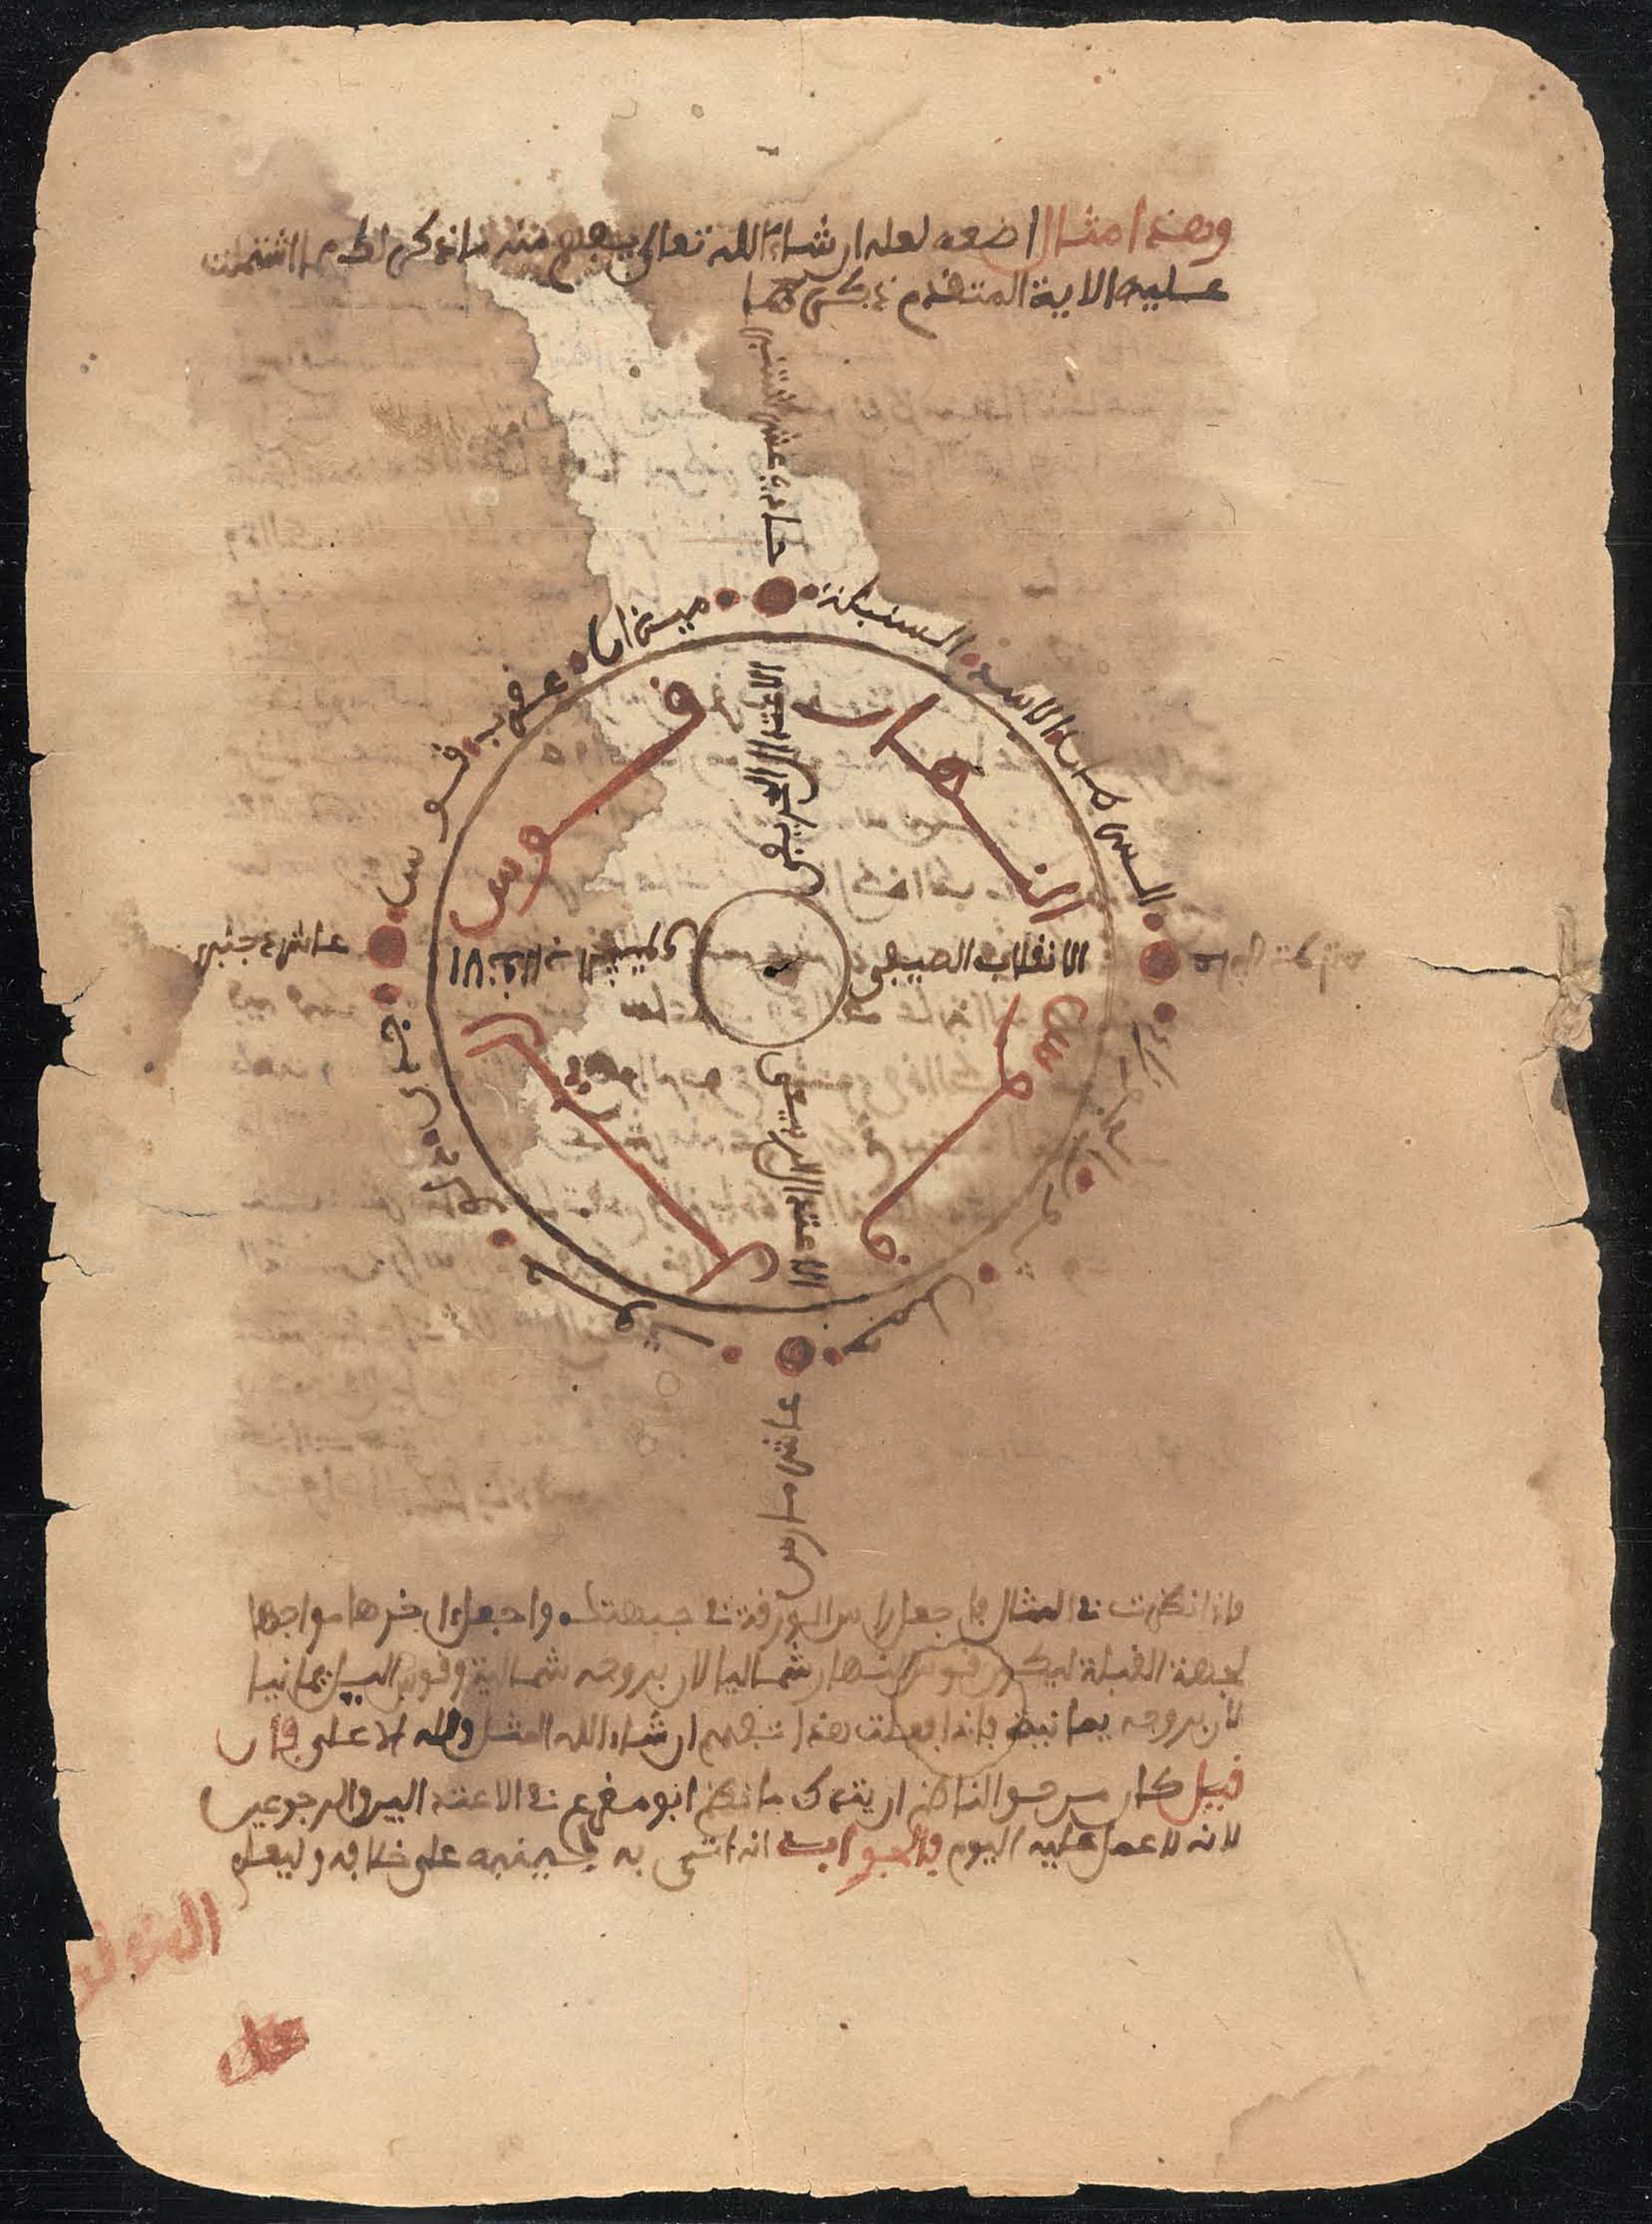 A manuscript on yellowed parchment paper with astrological writing and a circle drawing.